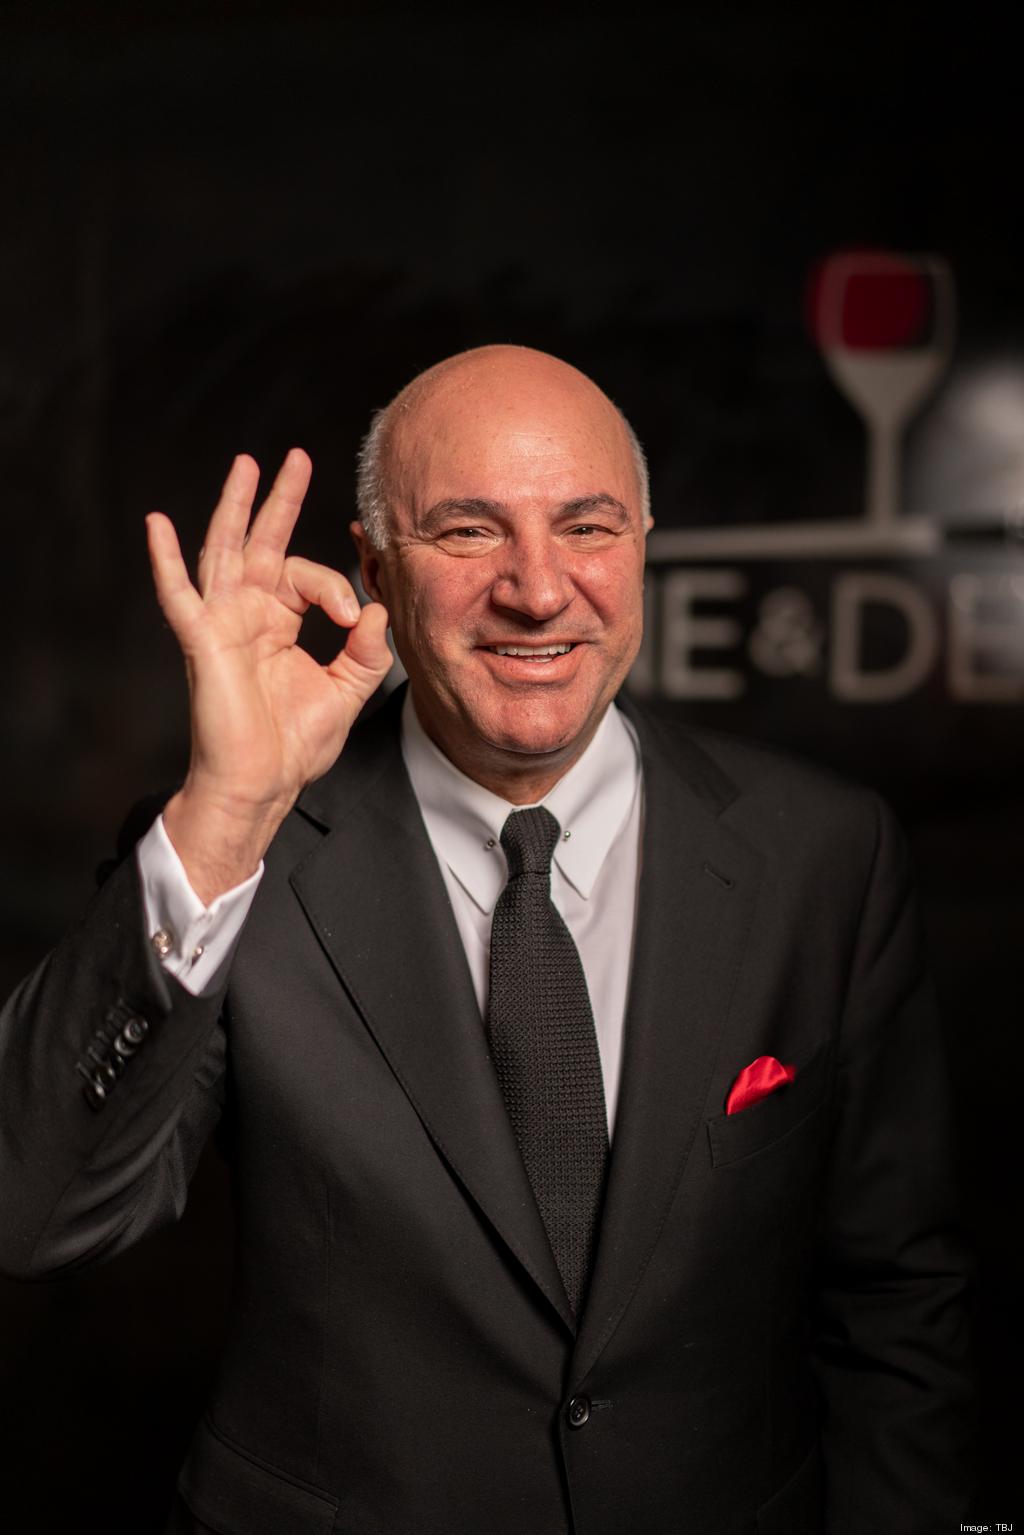 Kevin O'Leary of 'Shark Tank' visits Raleigh for lates Wine & Design  location - Triangle Business Journal